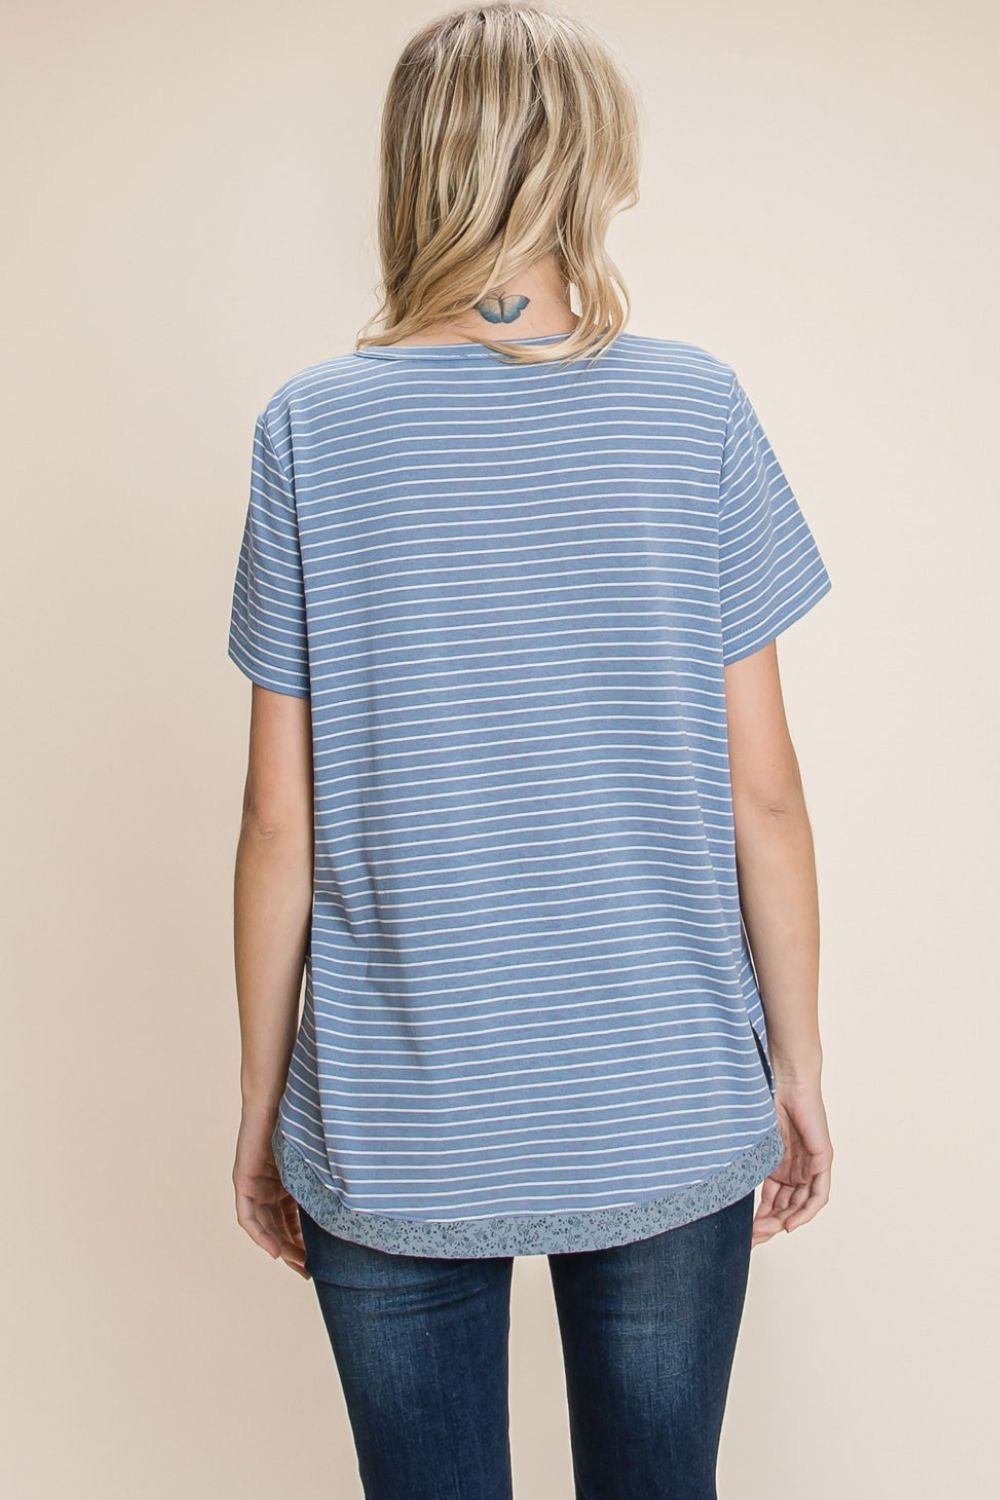 Striped Notched Short Sleeve T-Shirt - Trendy Cotton Bleu Design by Nu Lab, Perfect for Casual Wear with Slit Detailing